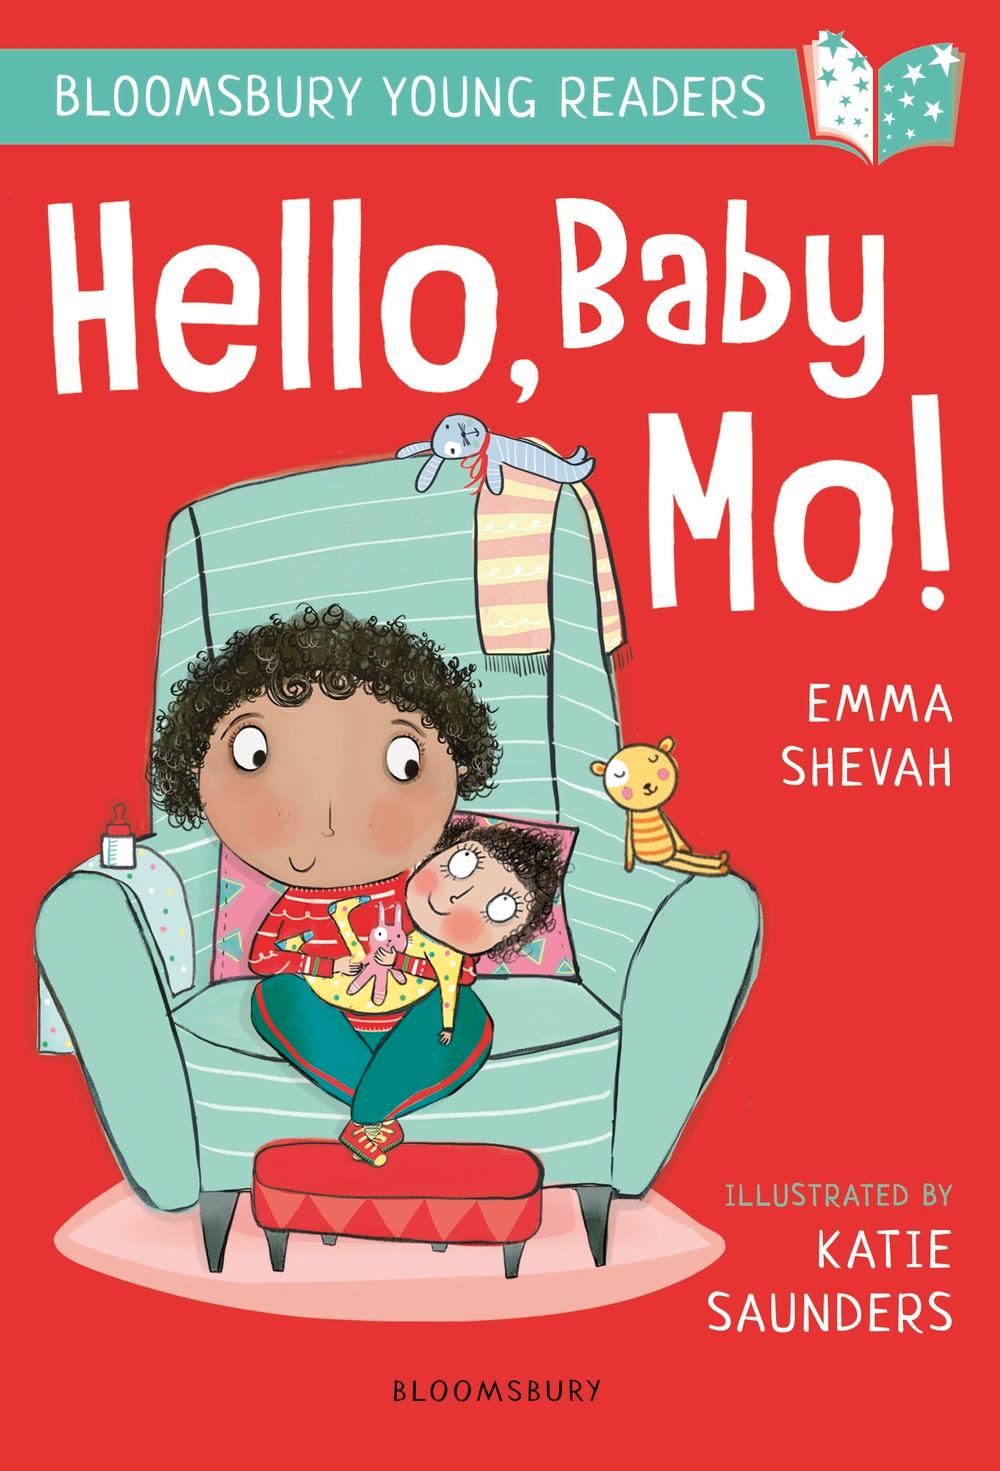 Hello, Baby Mo! A Bloomsbury Young Reader - Emma Shevah